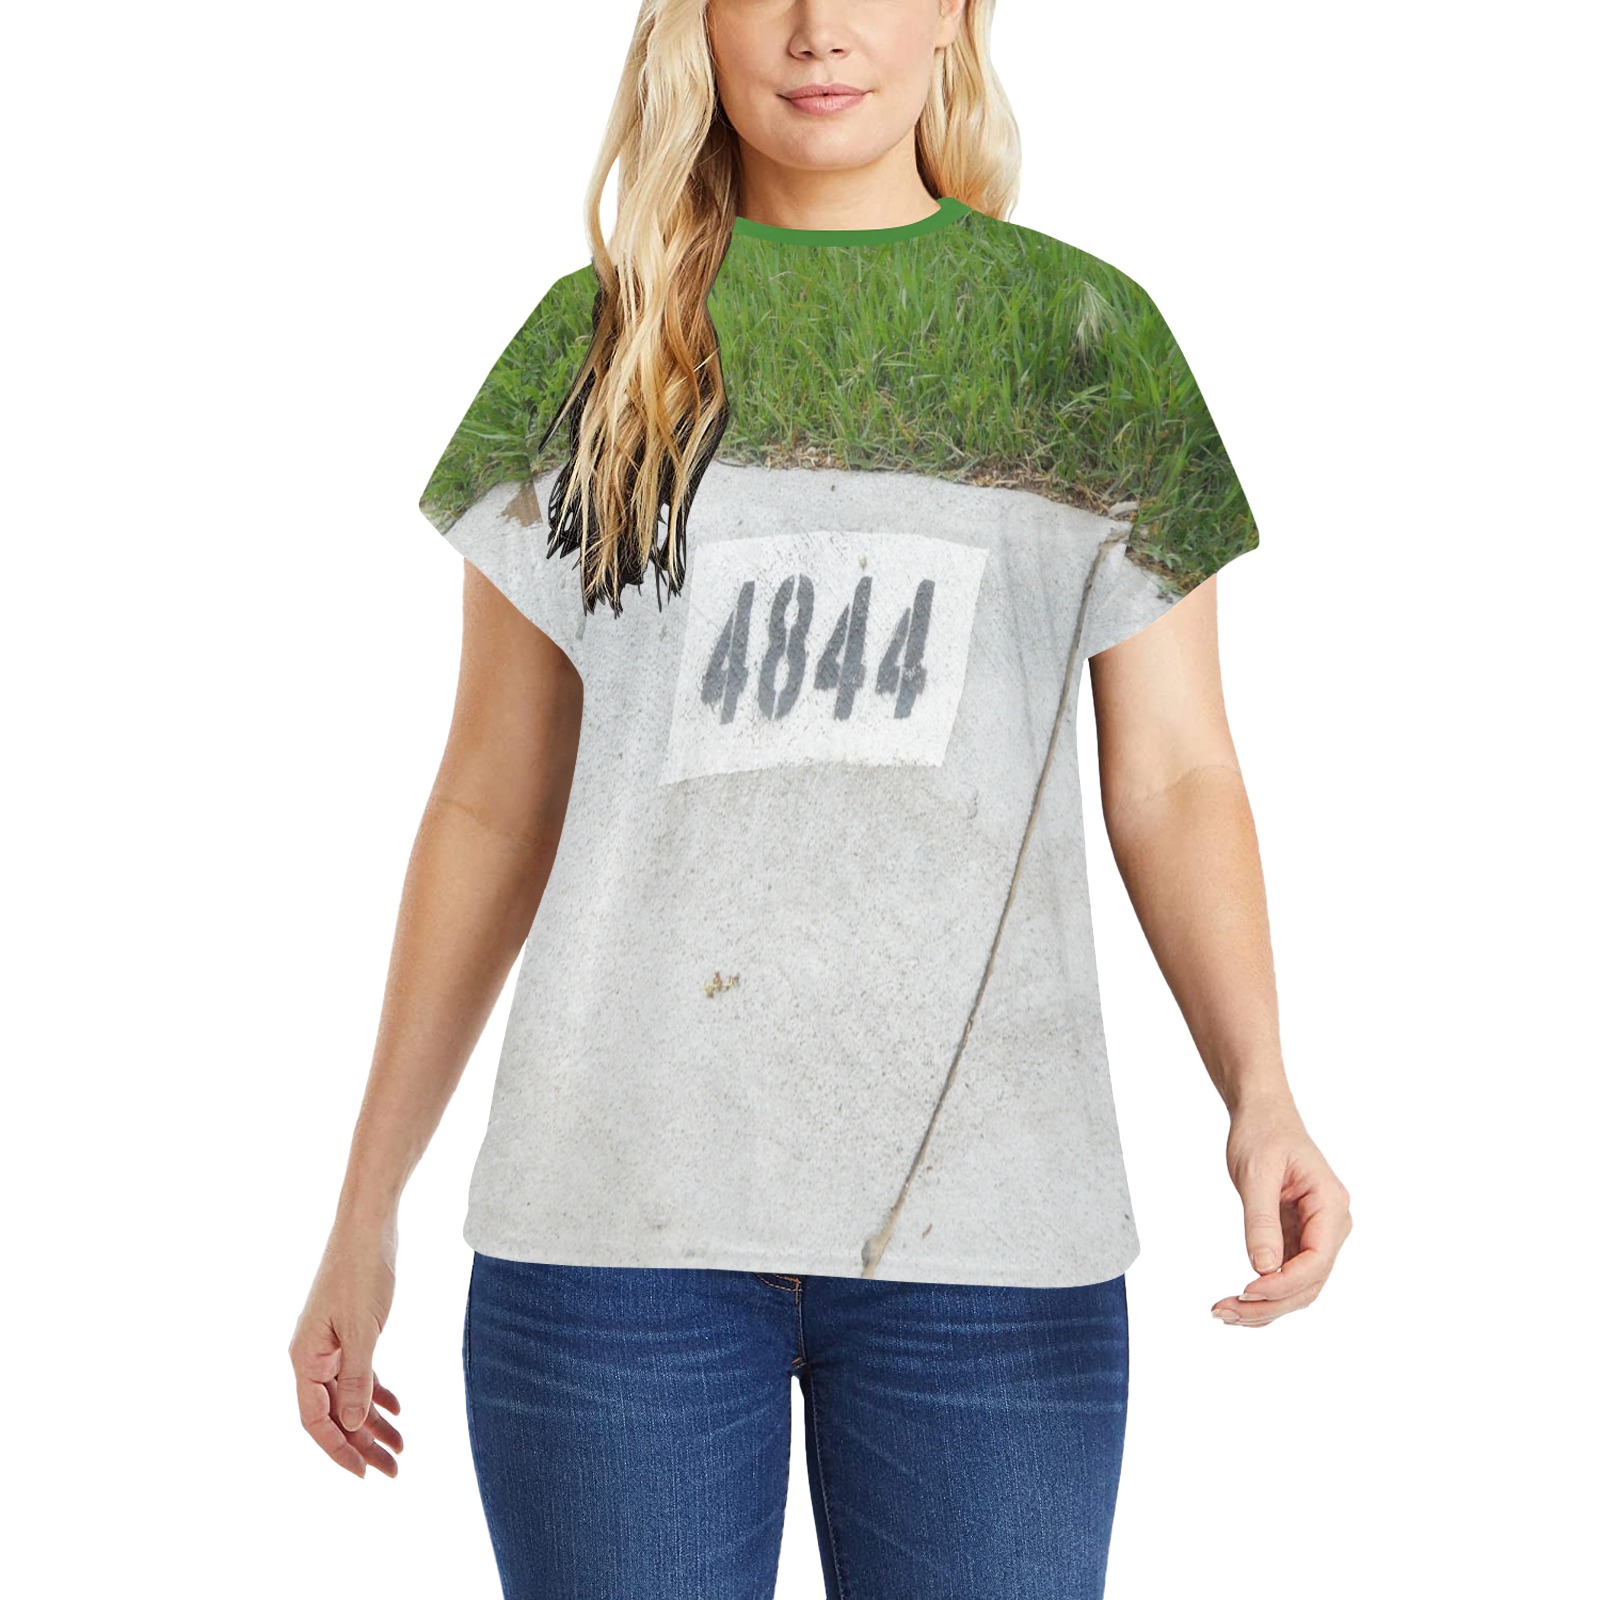 Street Number 4844 with Bright Green Collar Women's Pajama T-shirt